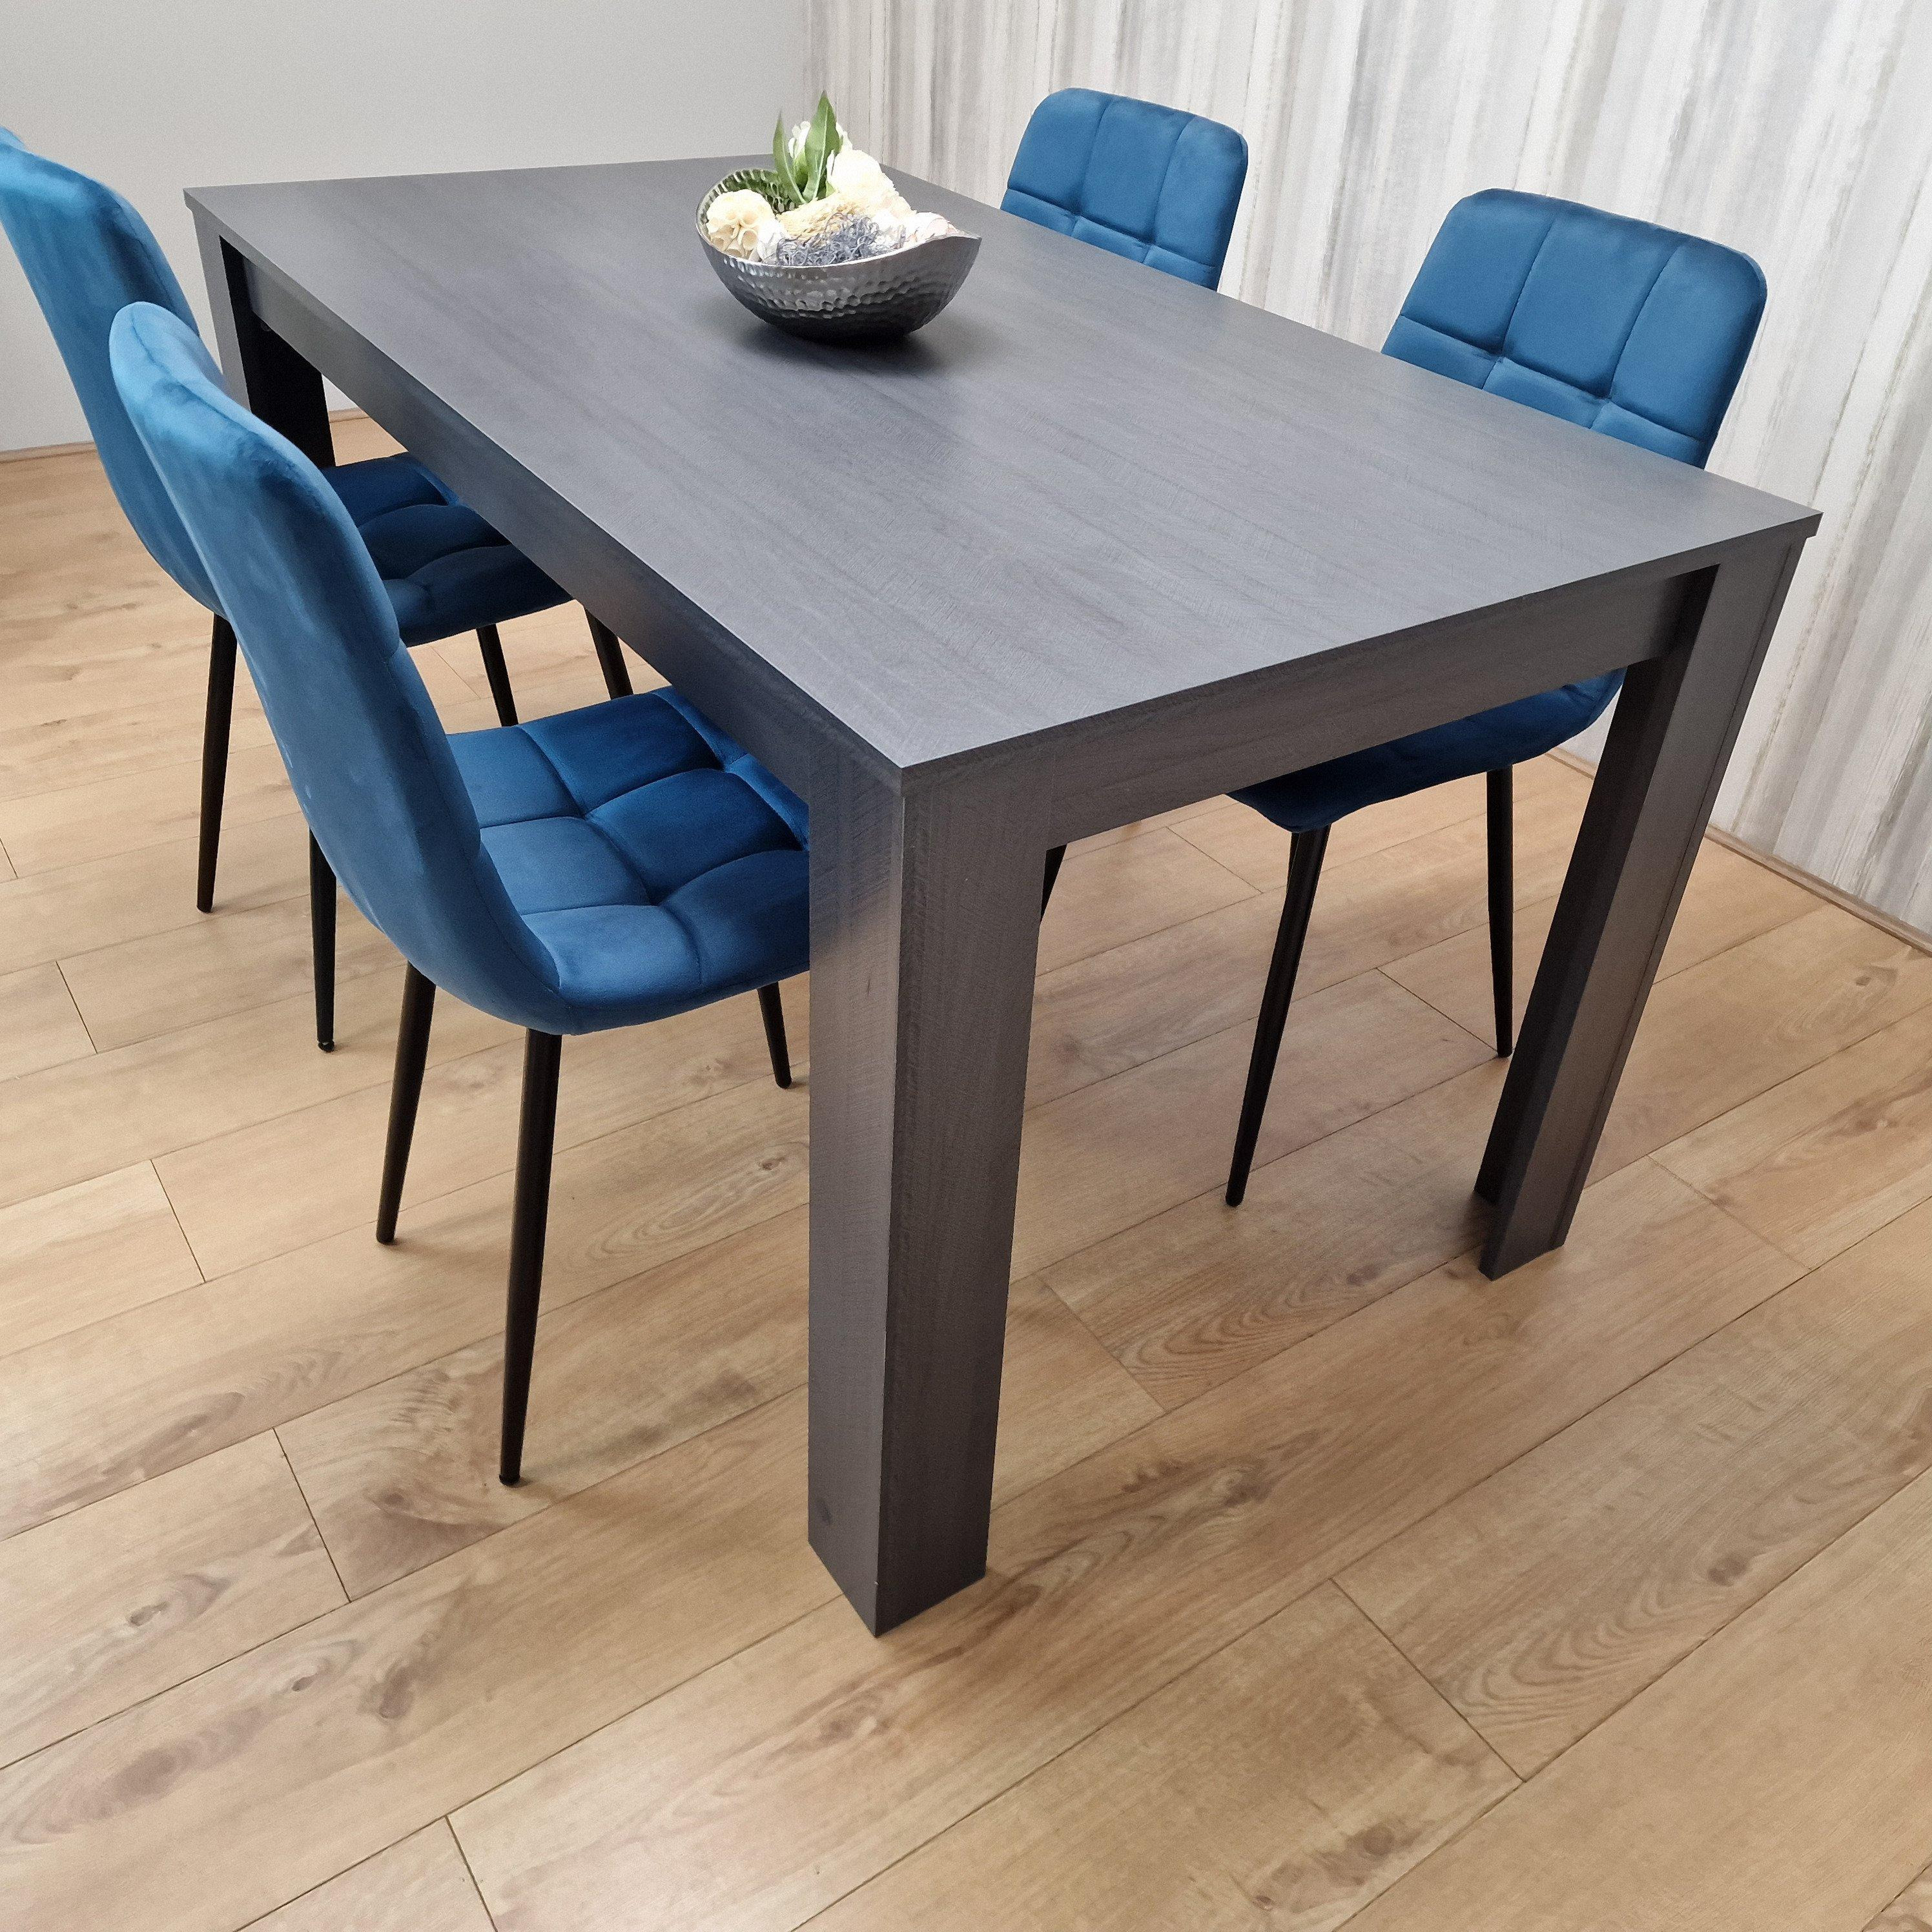 Grey Dining Table and 4 Blue Velvet Chairs Kitchen Dining Table for 4 Dining Room Dining Set - image 1